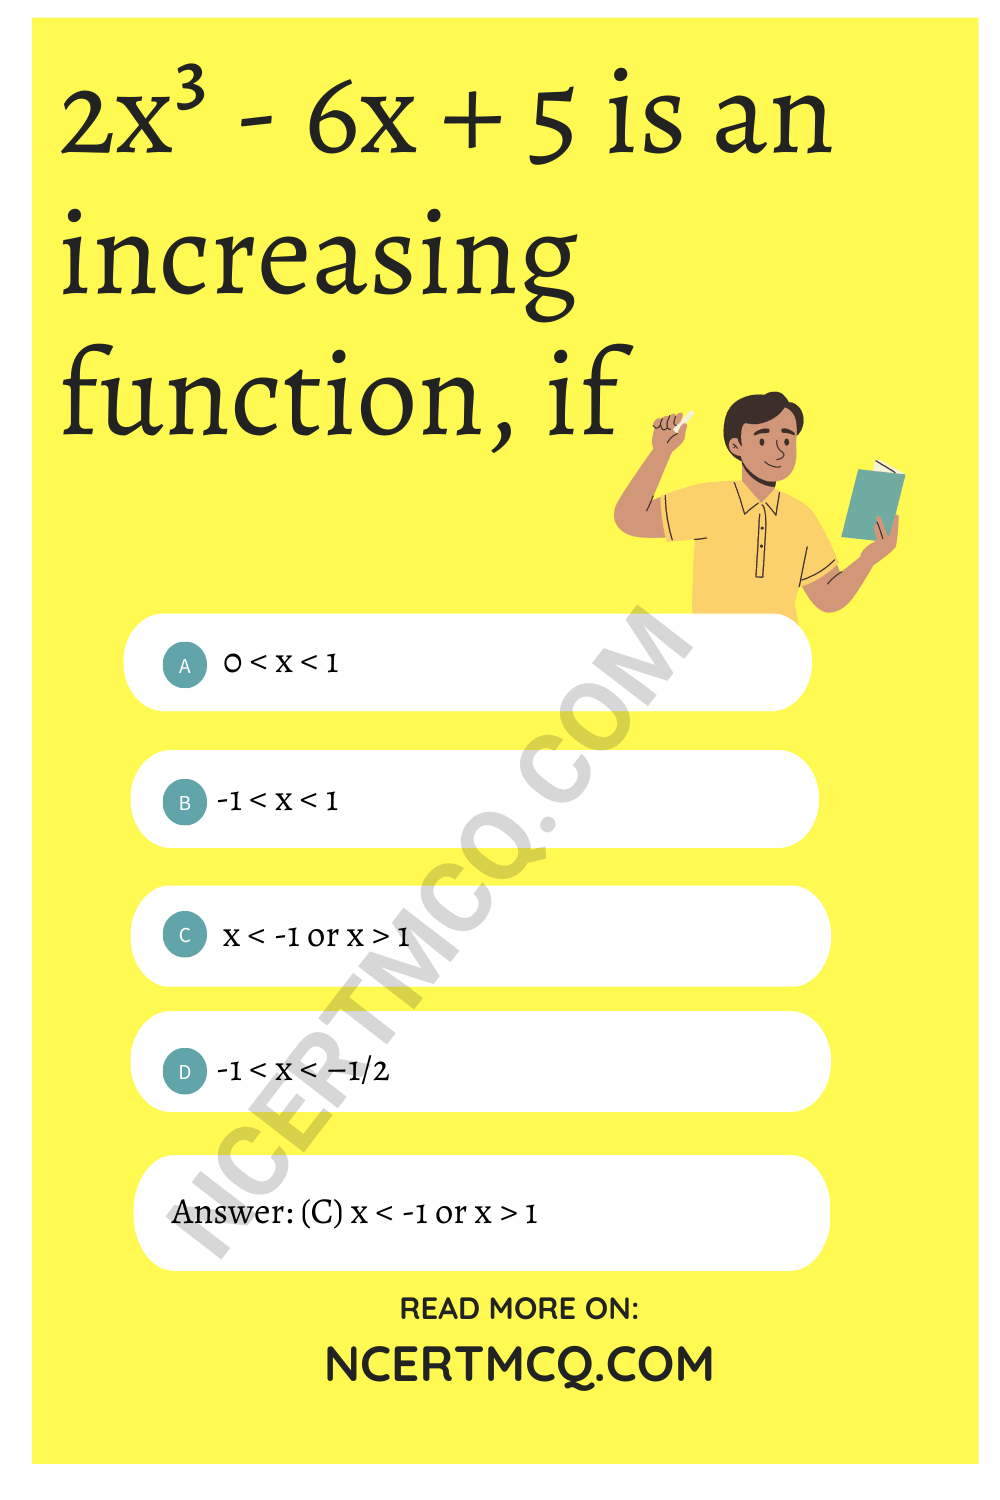 2x³ - 6x + 5 is an increasing function, if